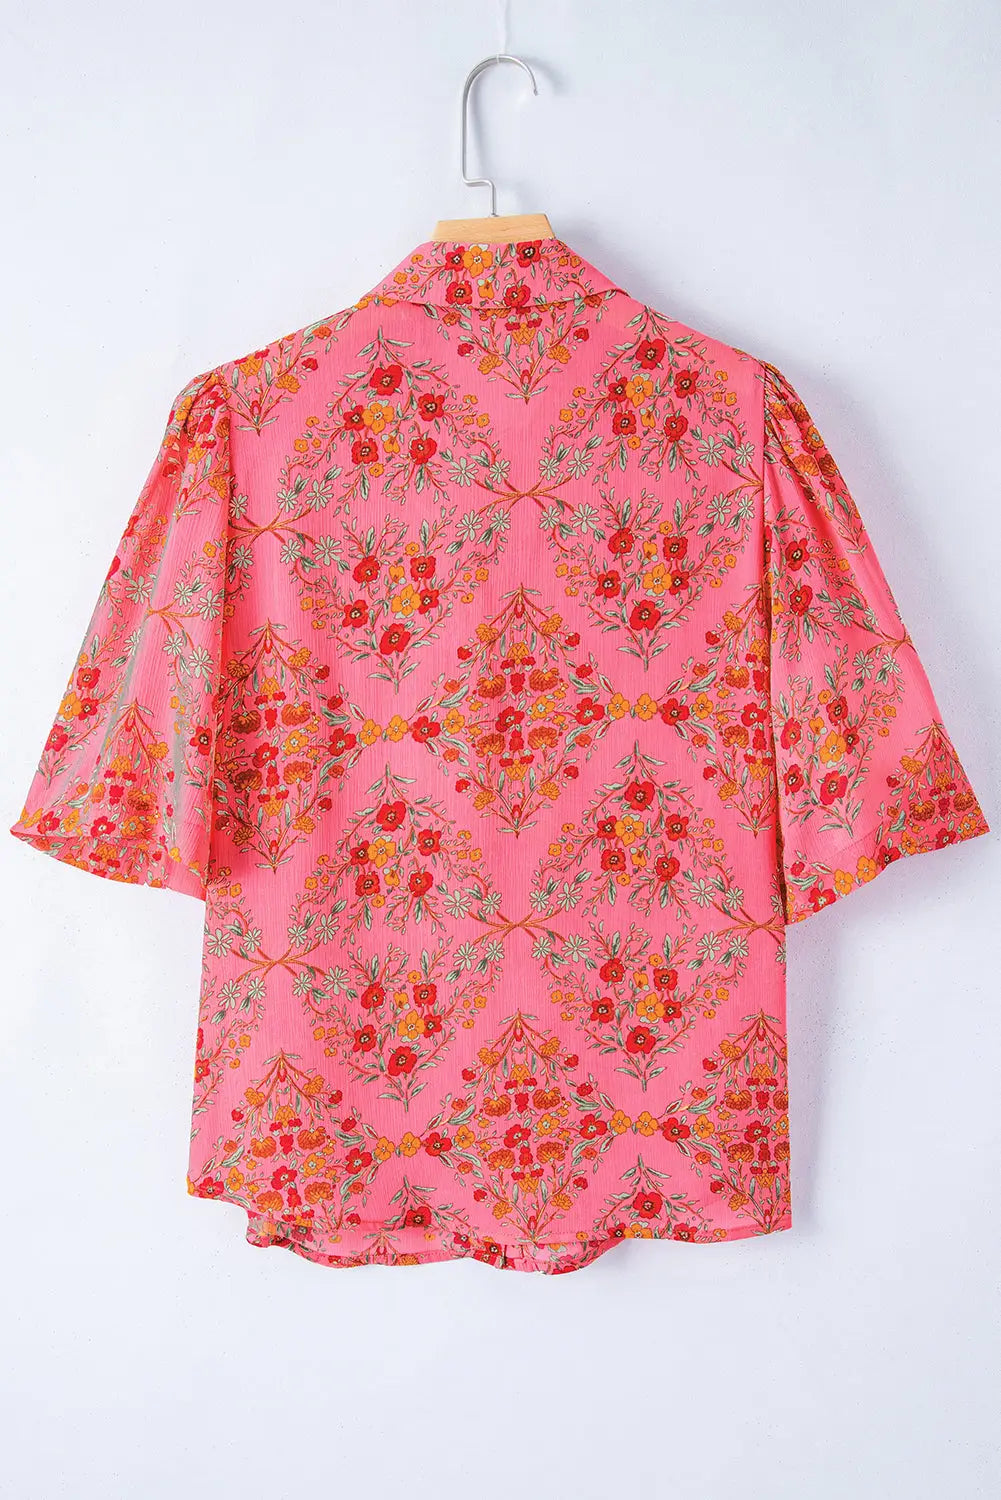 Rose red floral loose shirt - tops/blouses & shirts